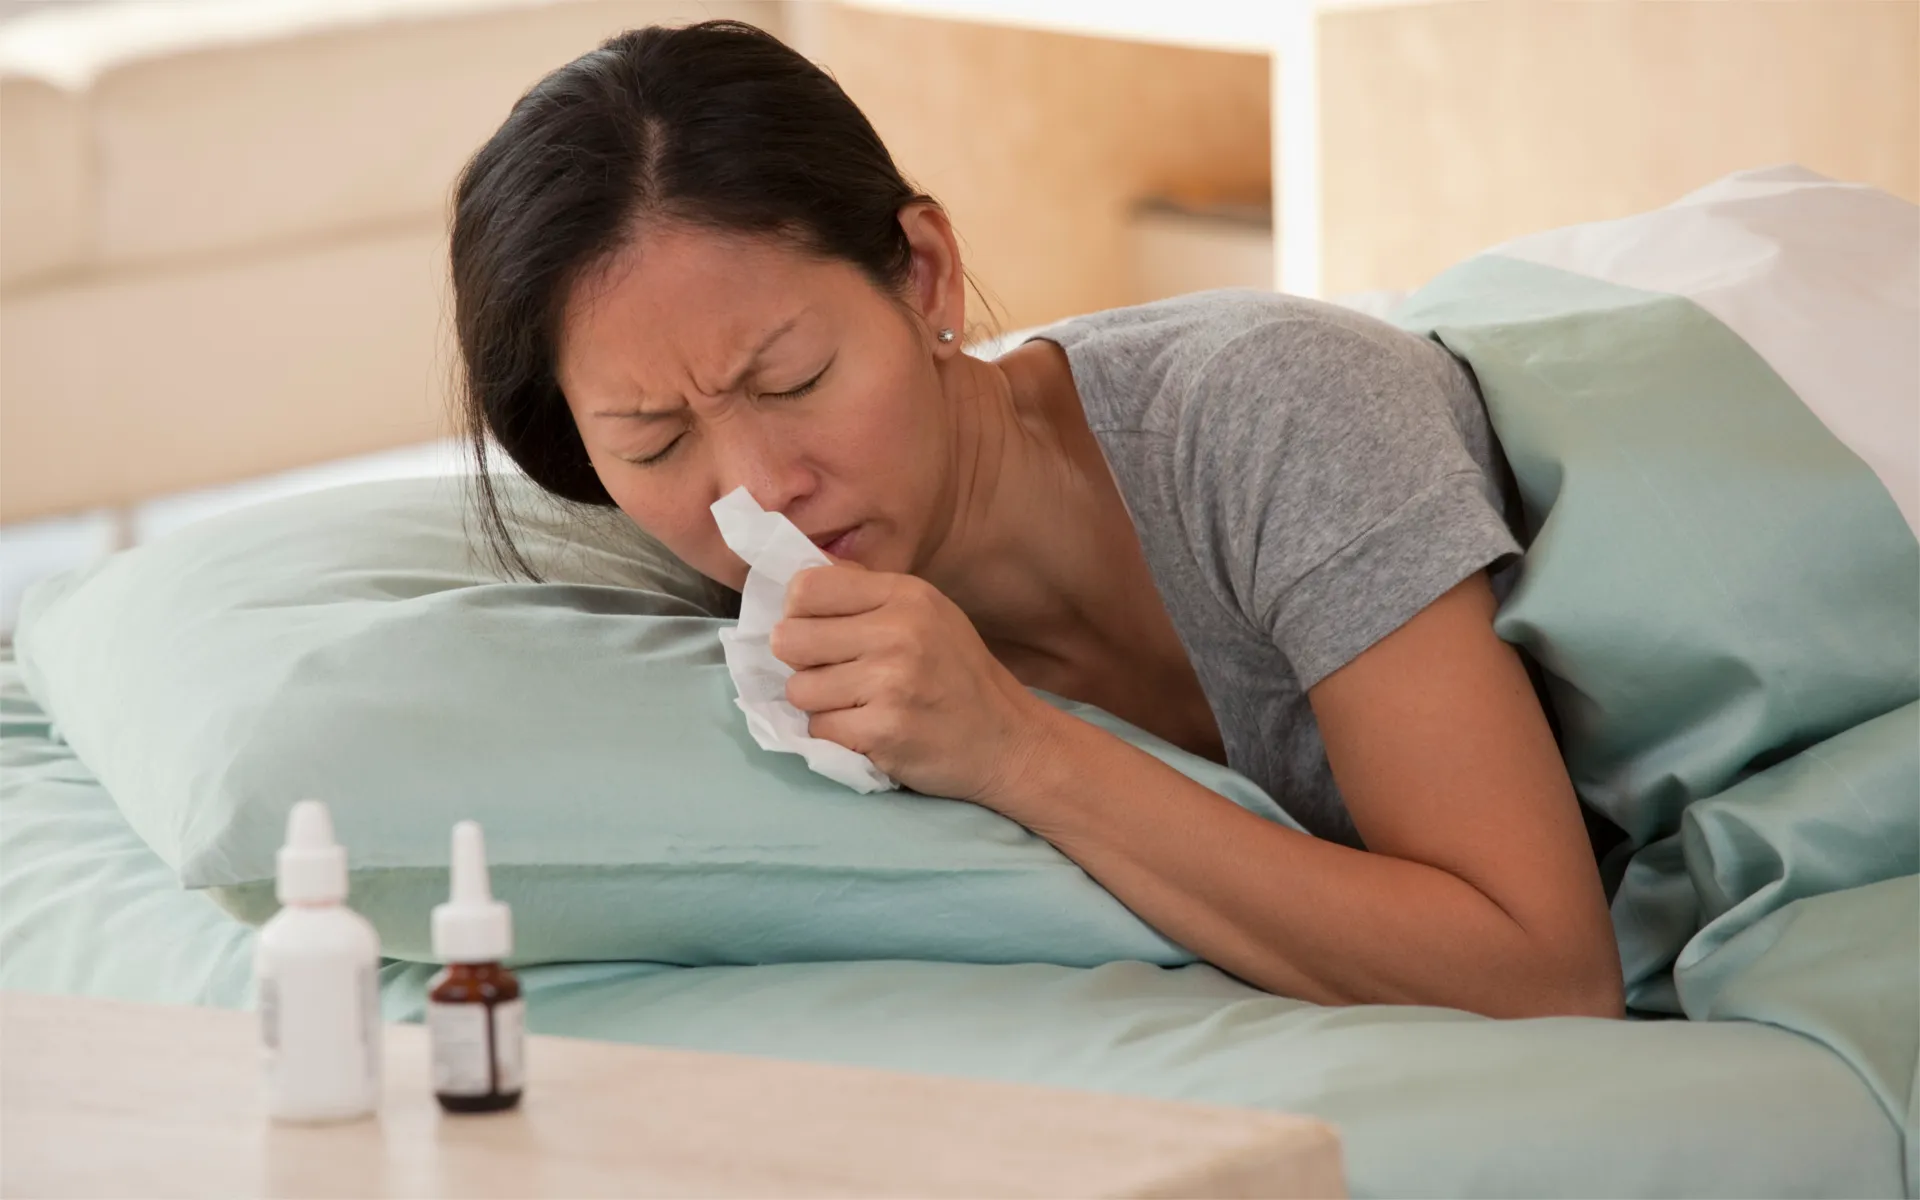 5 Things You Need to Know About This Year’s Flu